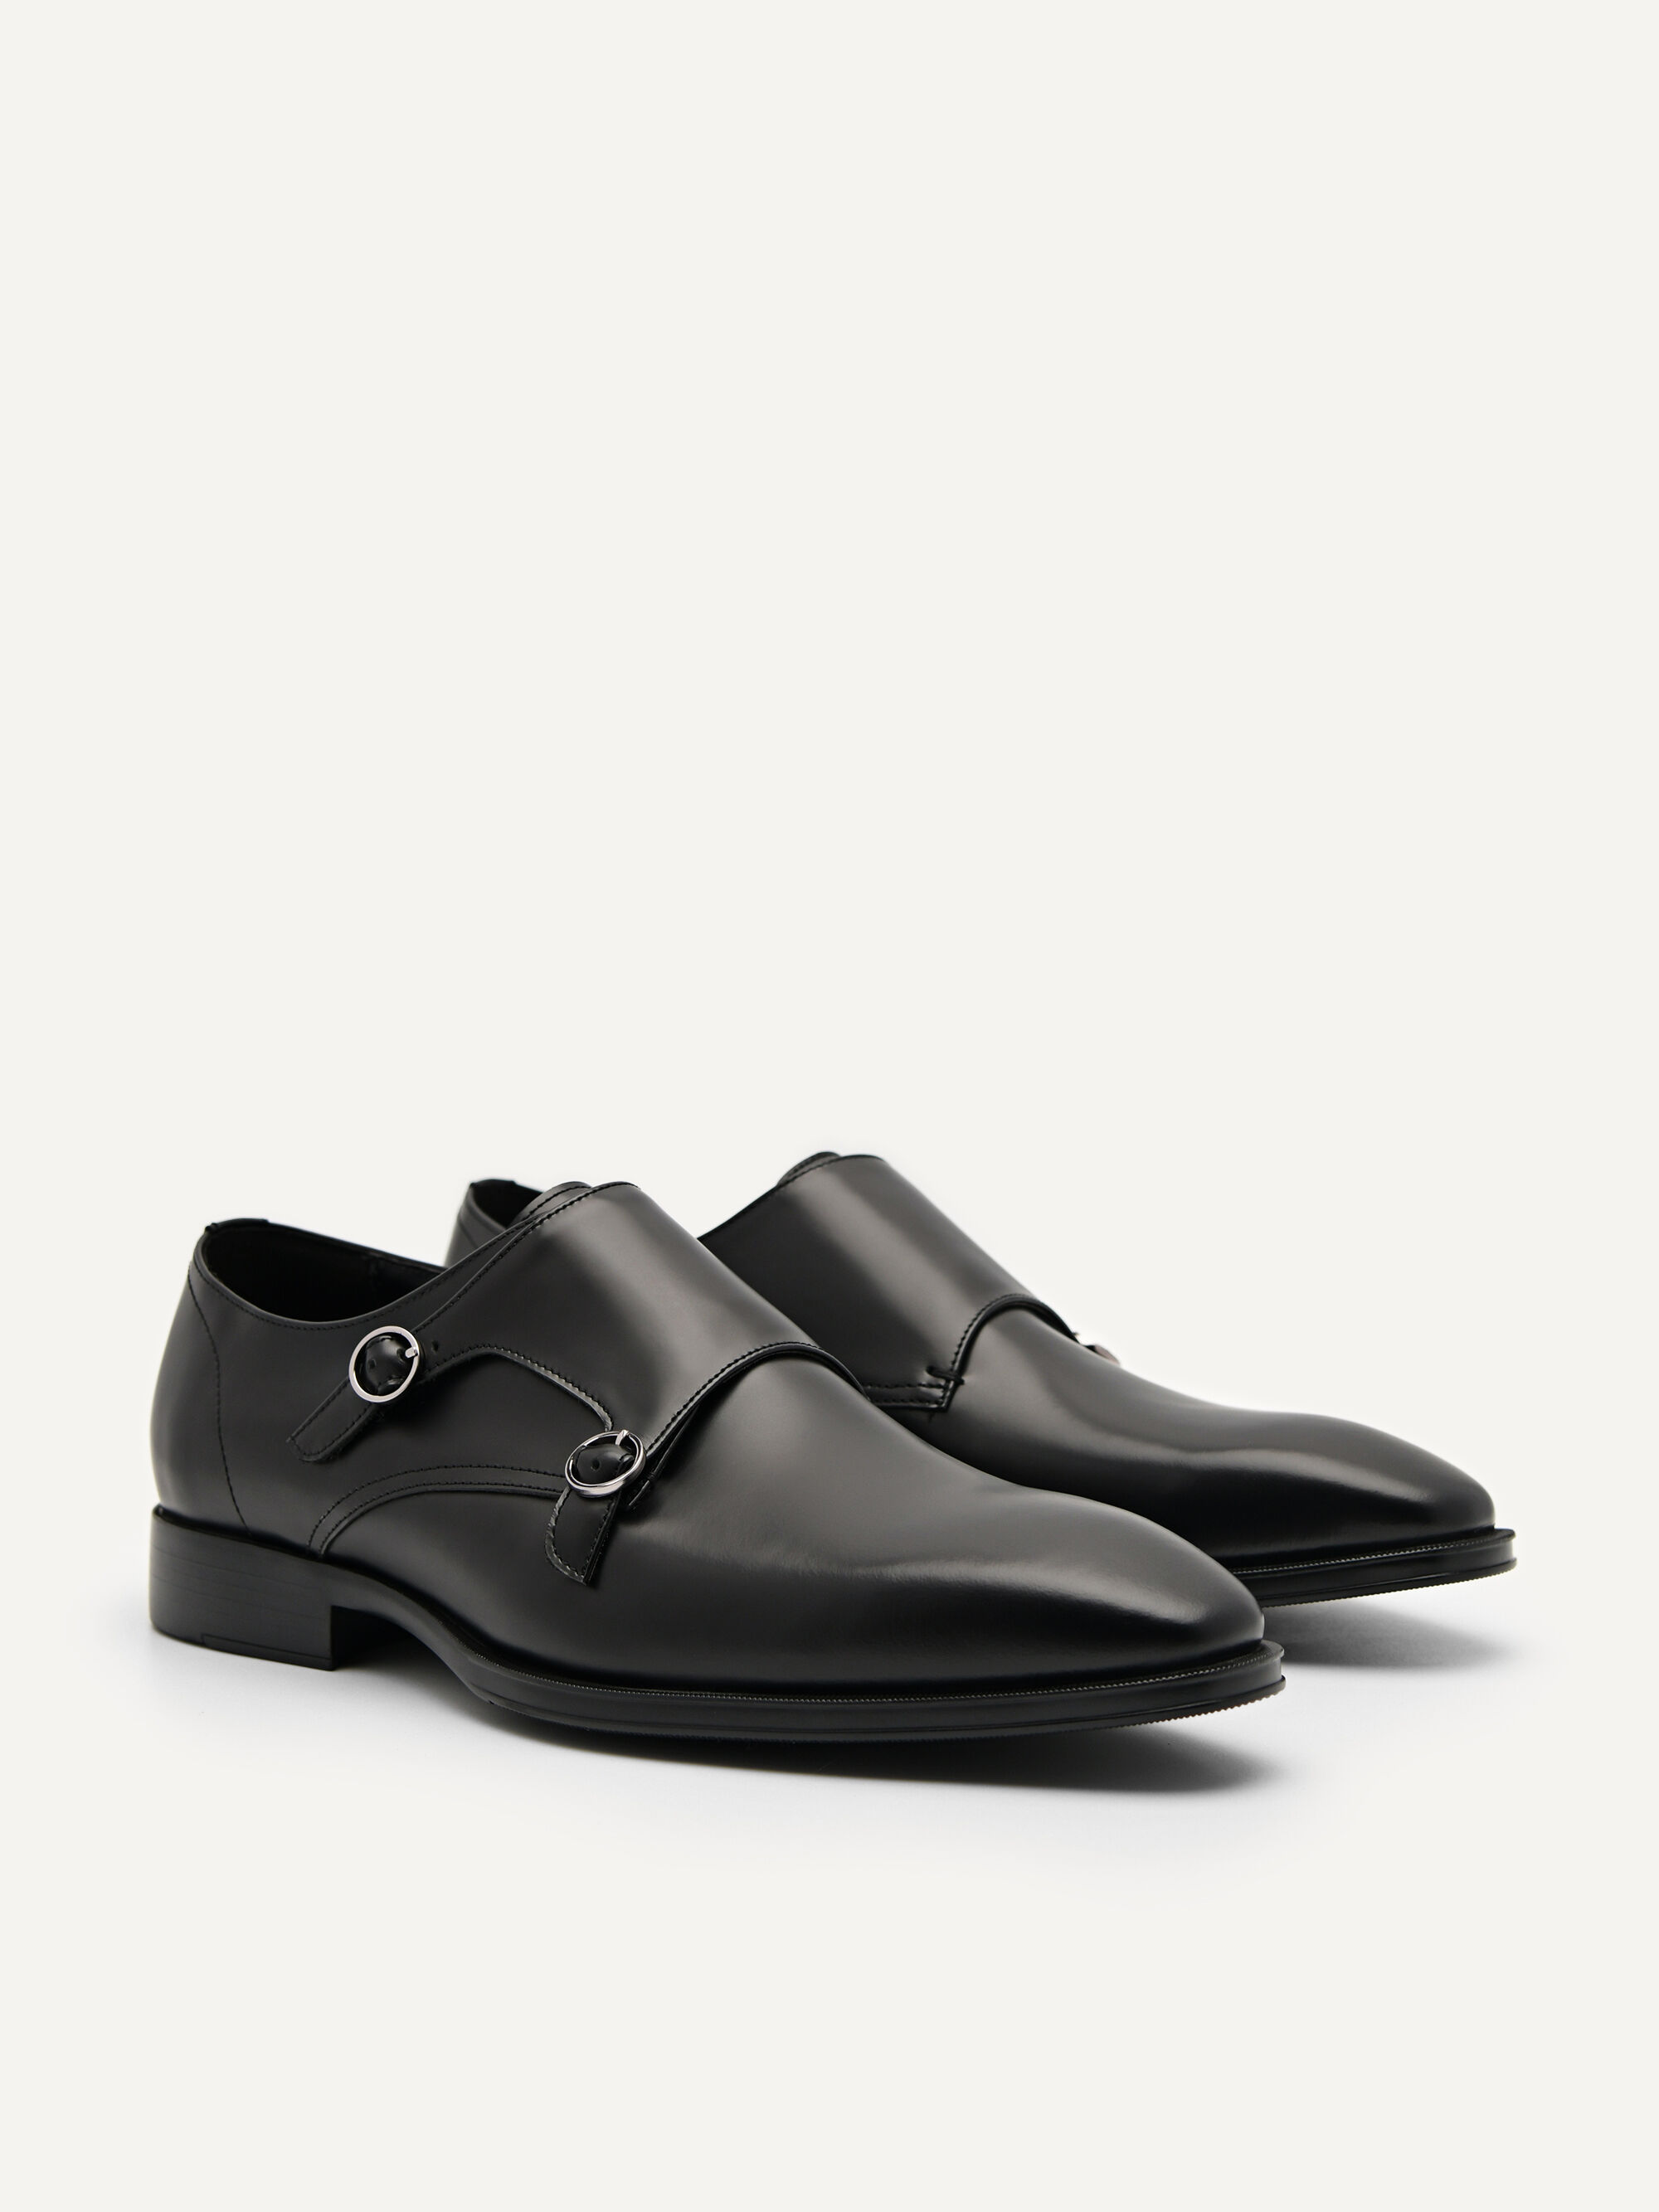 Black Holly Leather Double Monkstrap Shoes - PEDRO SG